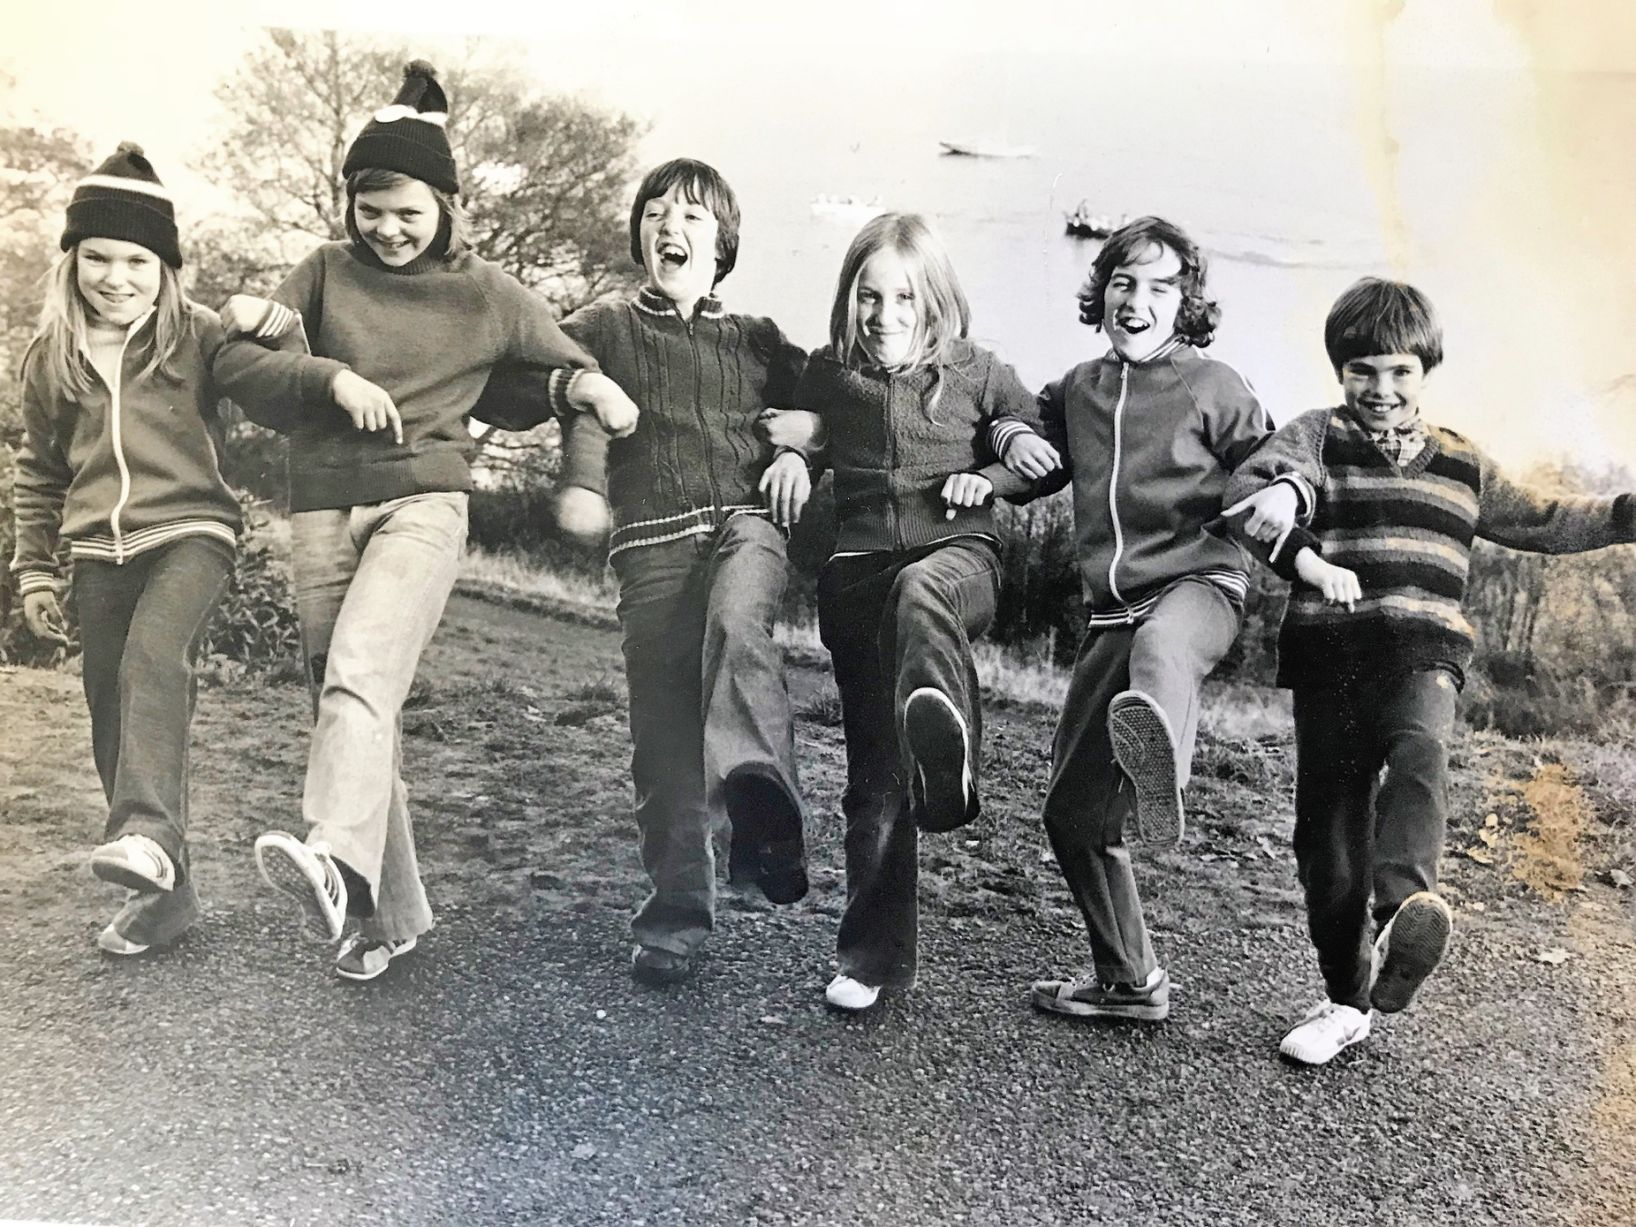 Archived photos such as this one from Glan-llyn in the 1980s  are being published to show the Urdd through the decades.